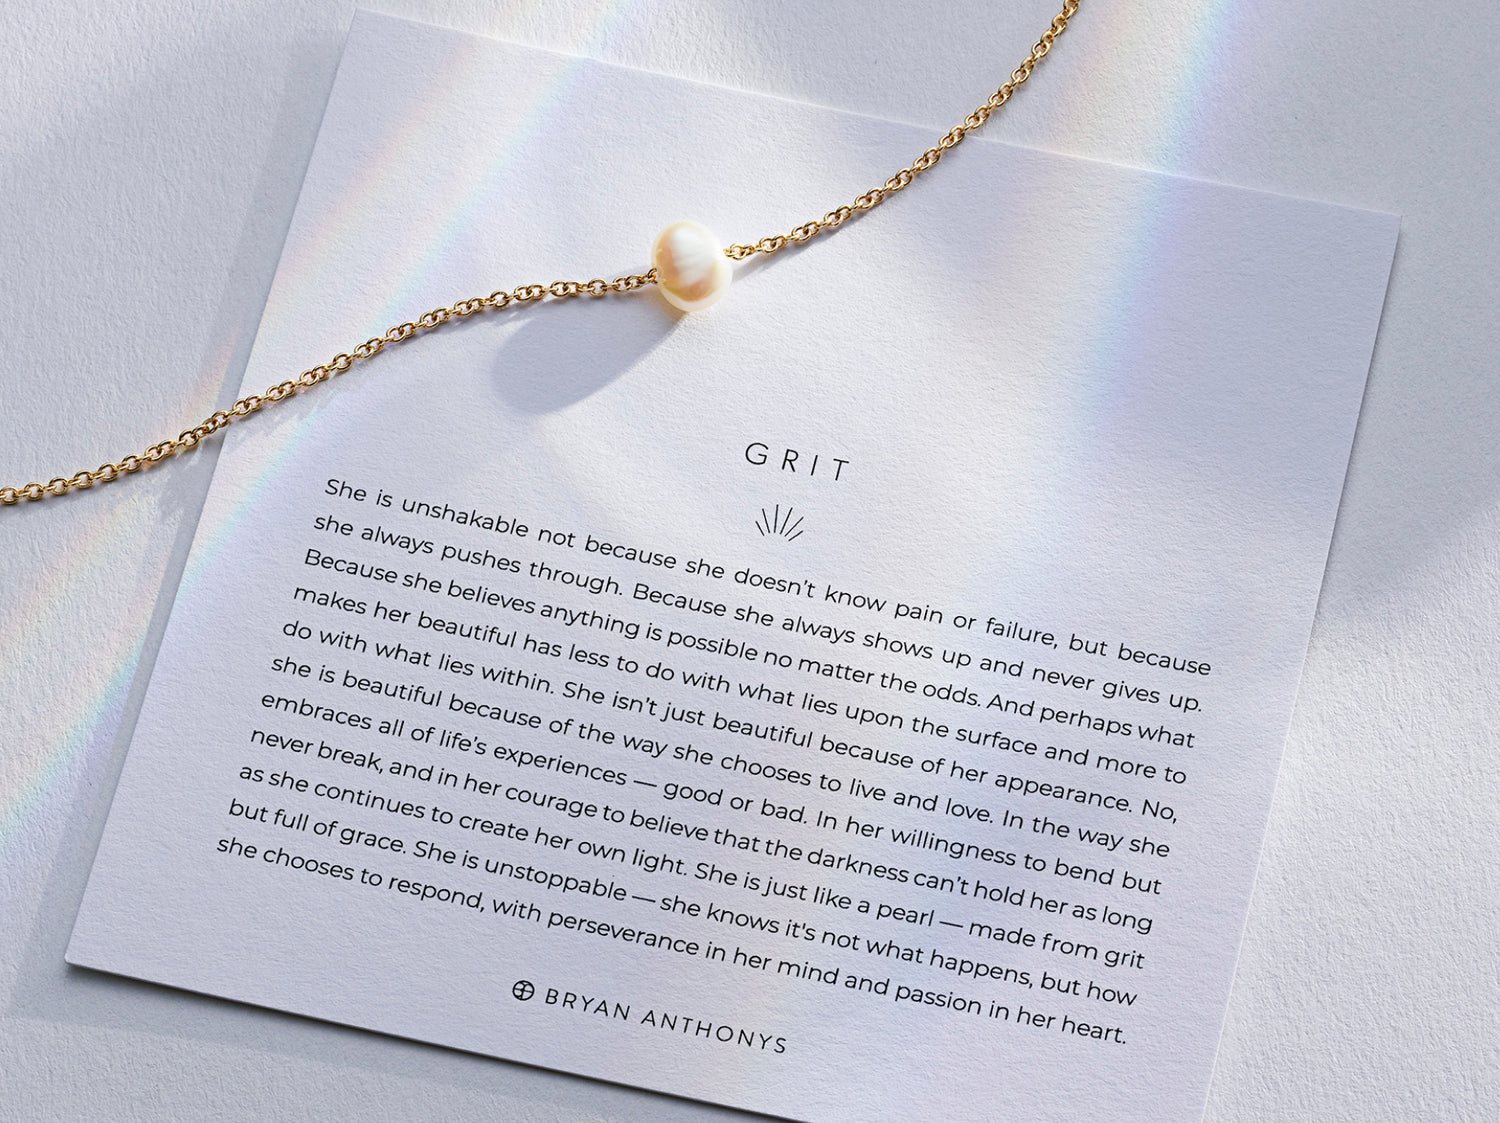 Grit Pearl Necklace in Gold with Description Meaning Card